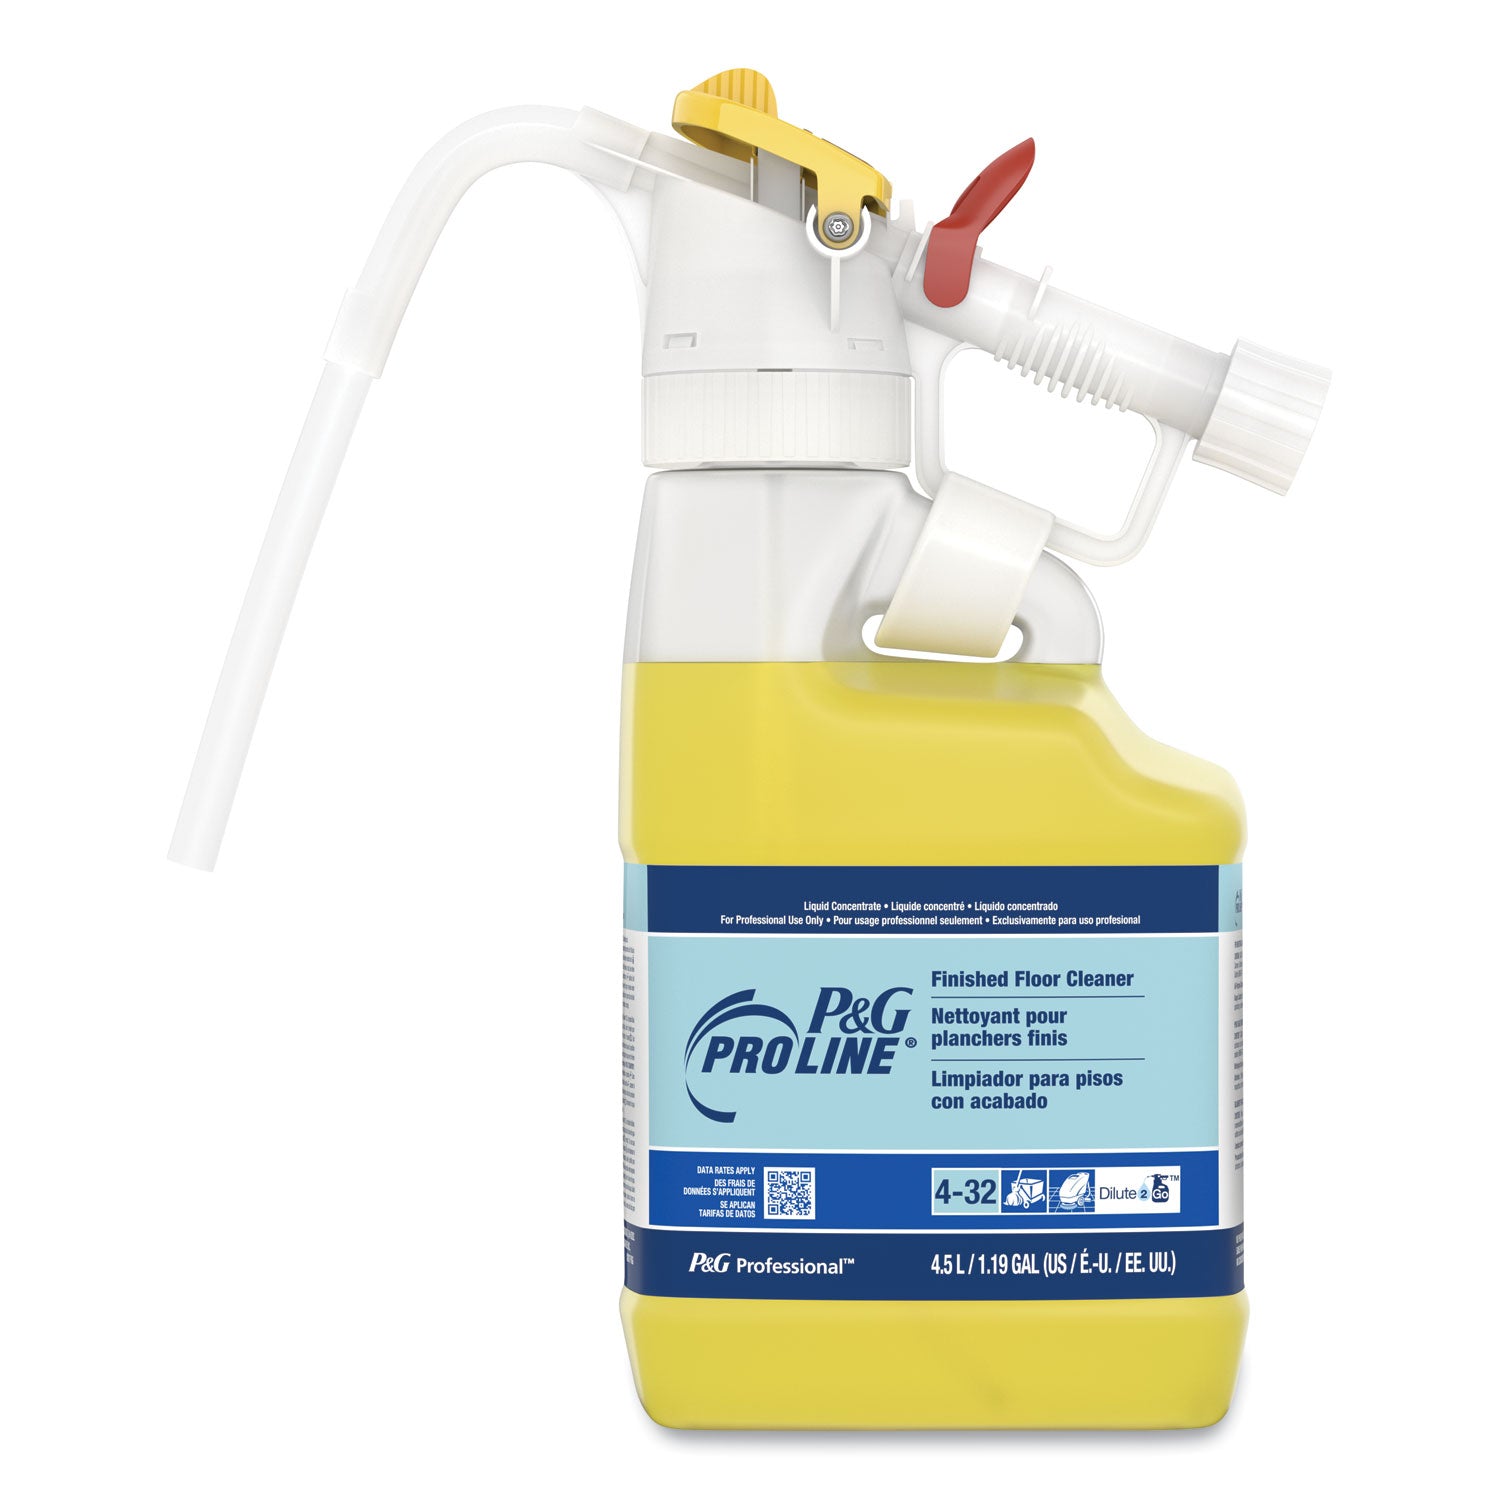 dilute-2-go-p-and-g-pro-line-finished-floor-cleaner-fresh-scent-45-l-jug-1-carton_pgc72003 - 1